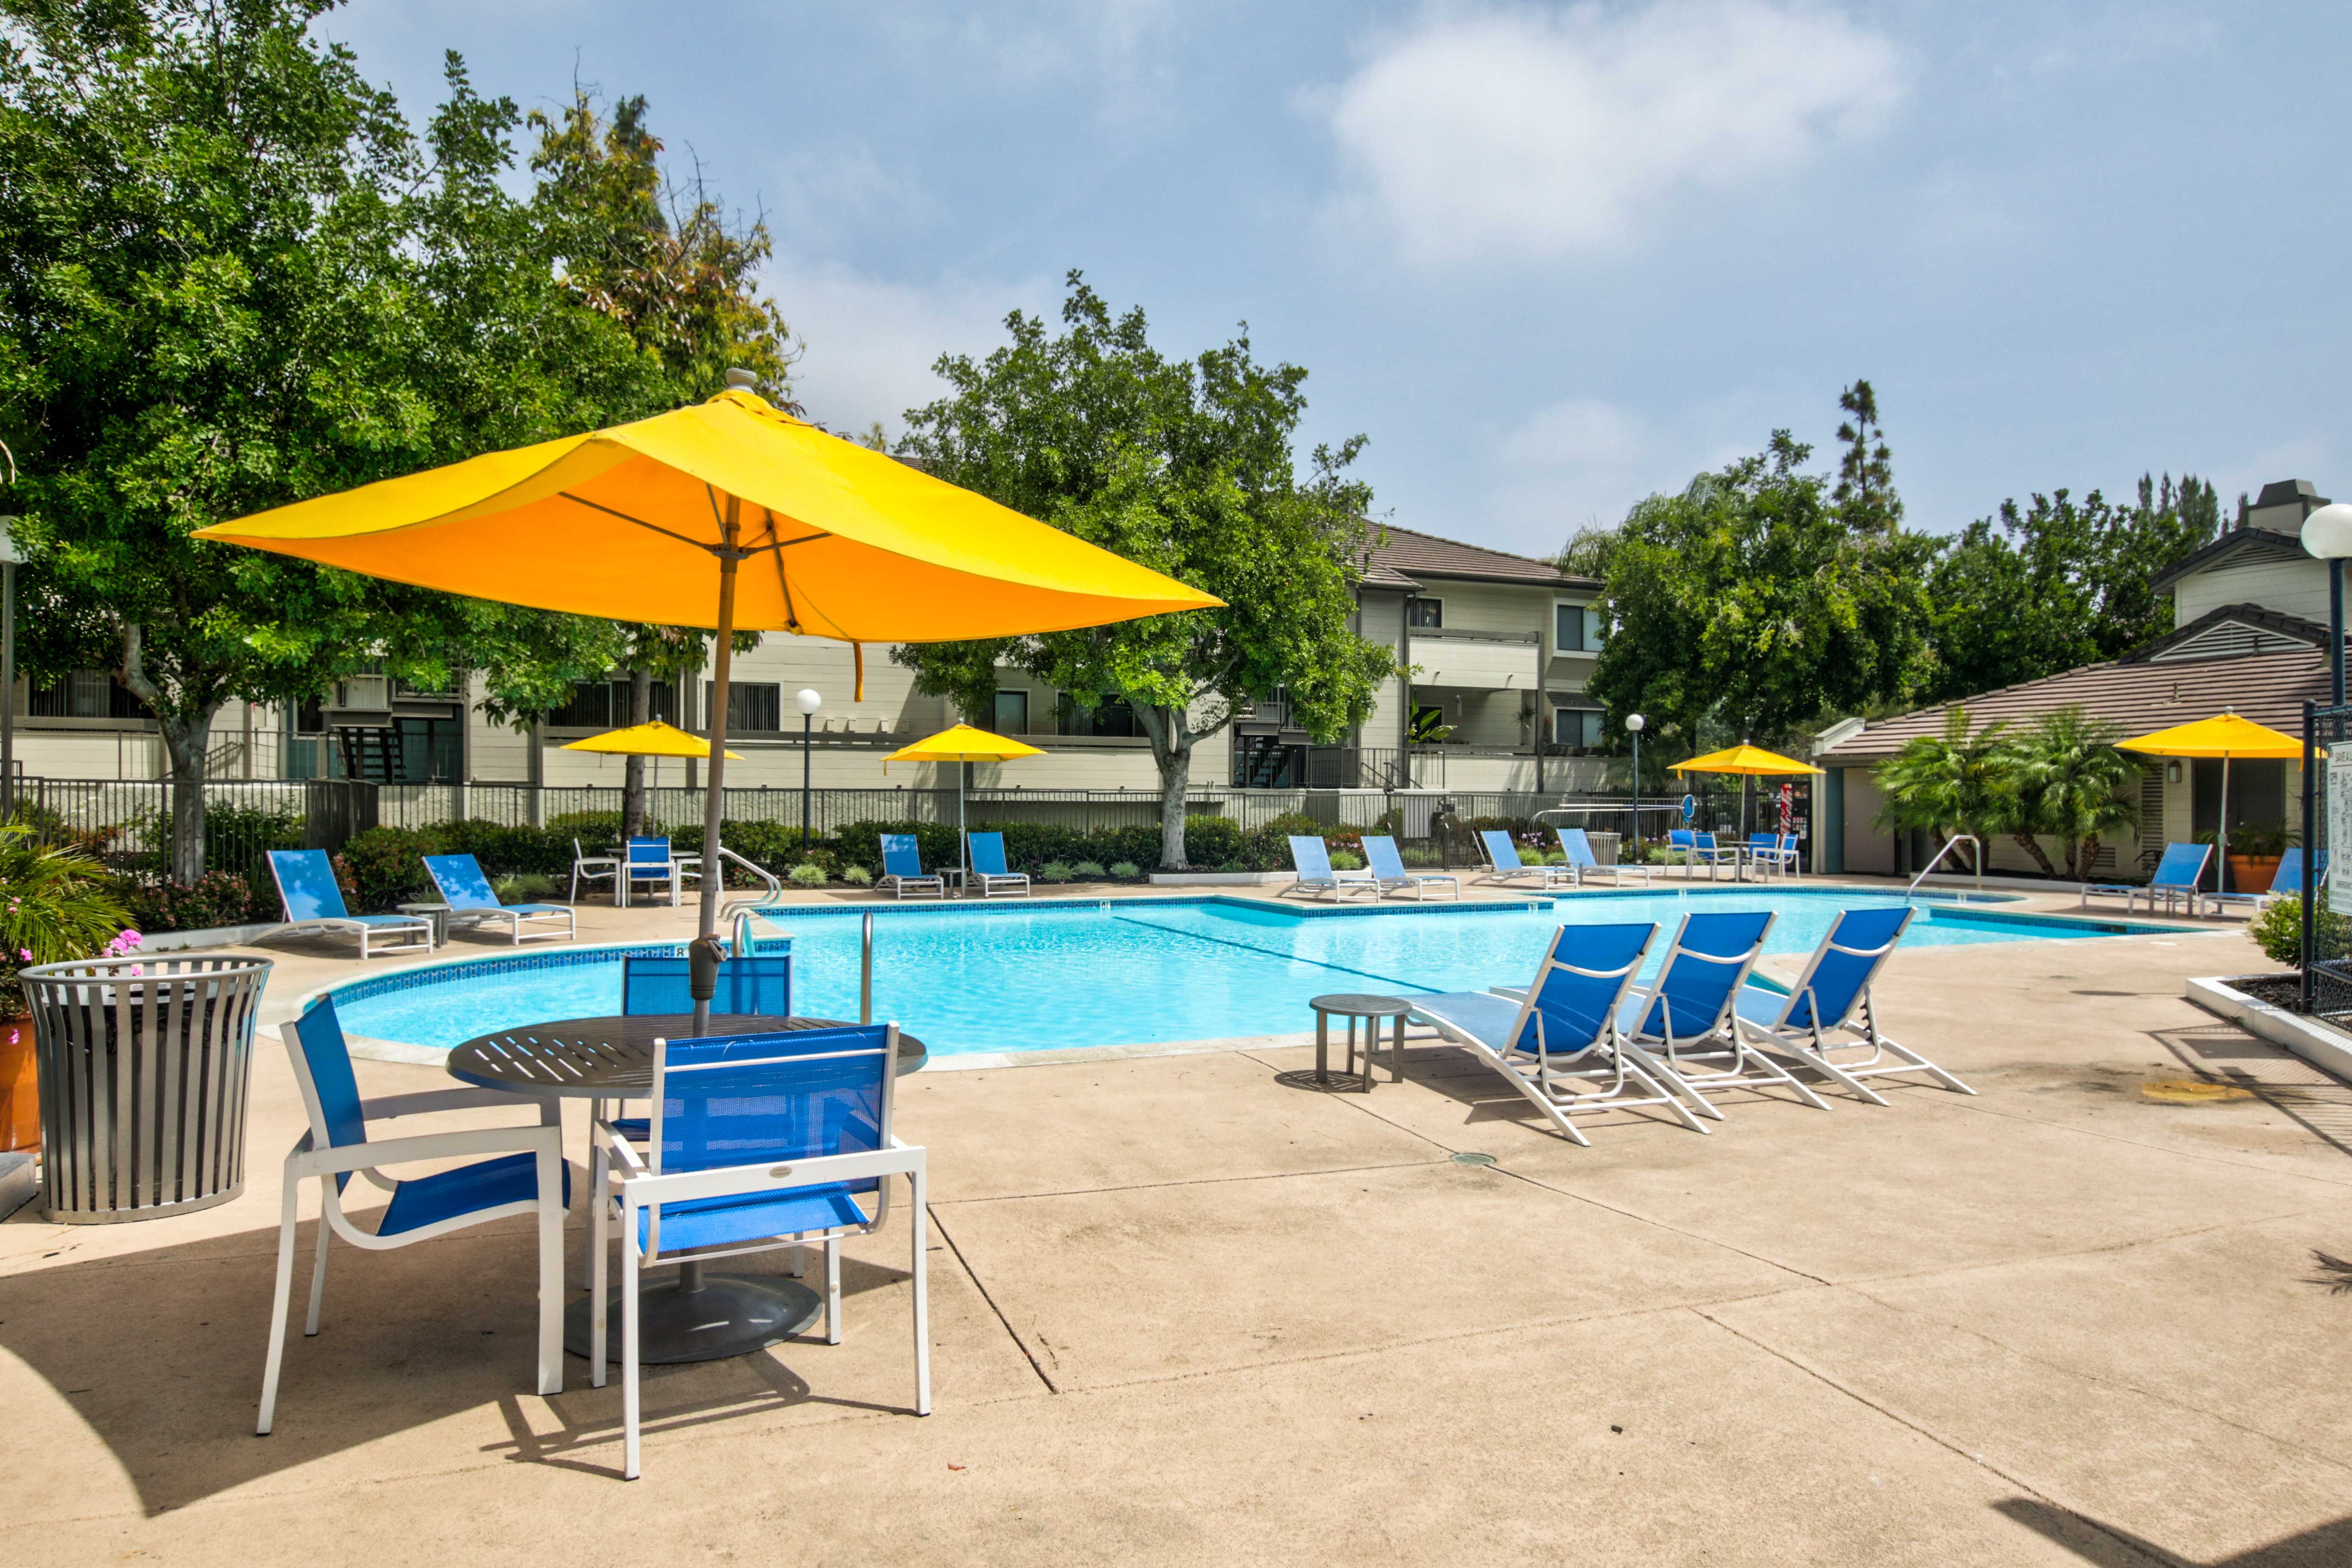 Closer view of pool area that is surrounded by multiple blue lounging chairs, small circular tables, and yellow umbrellas. On the border section of the outter fence is a strip of bushes and trees.